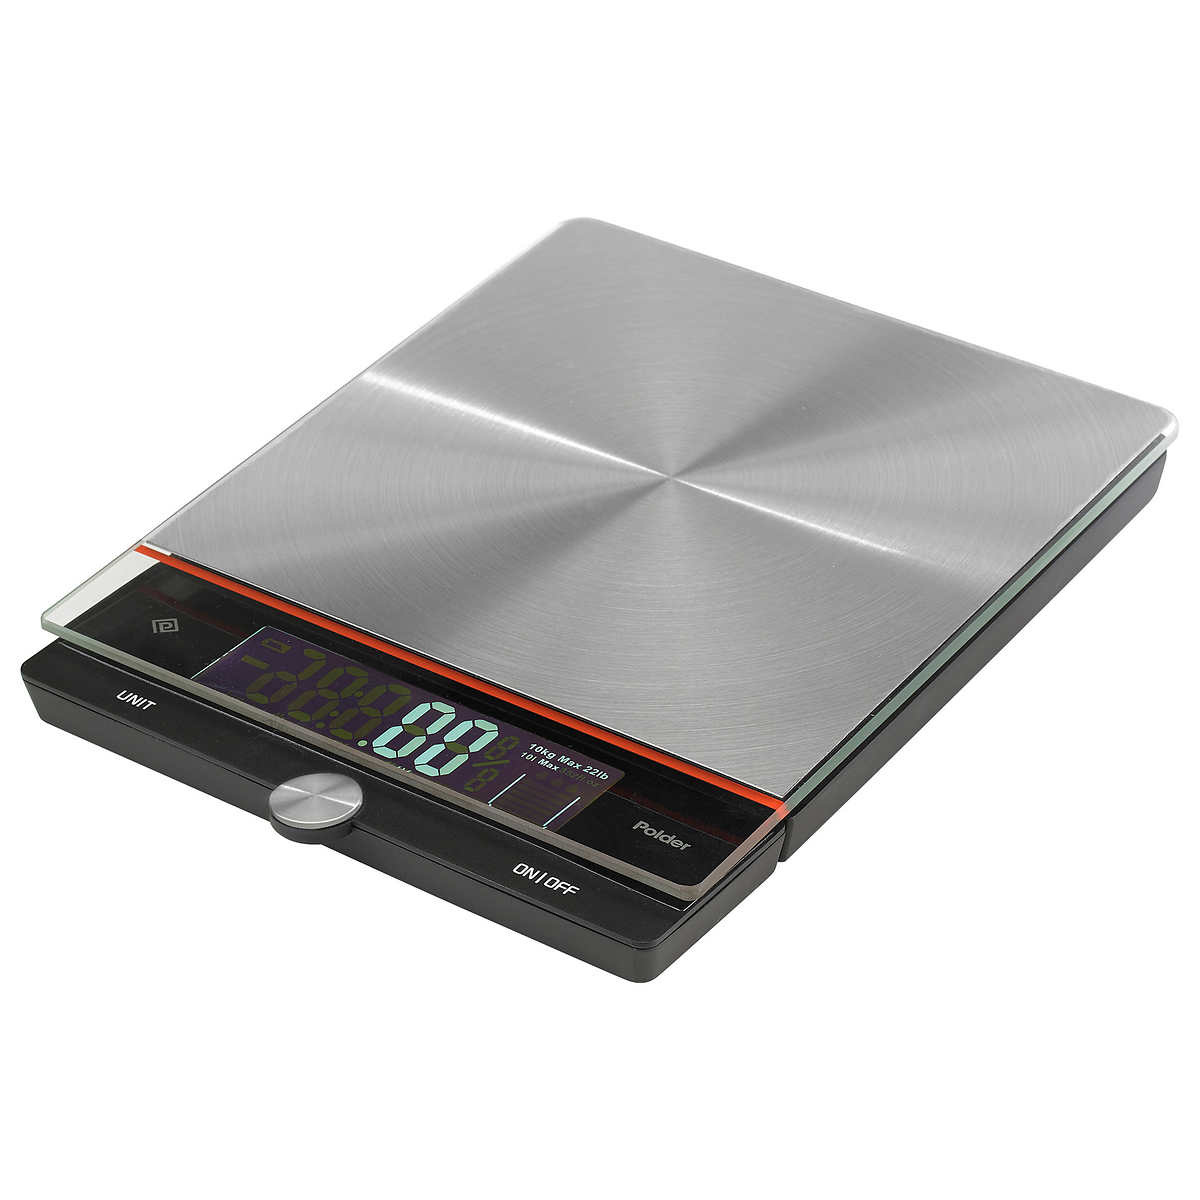 Premium Photo  Measuring flour with electronic kitchen scales for